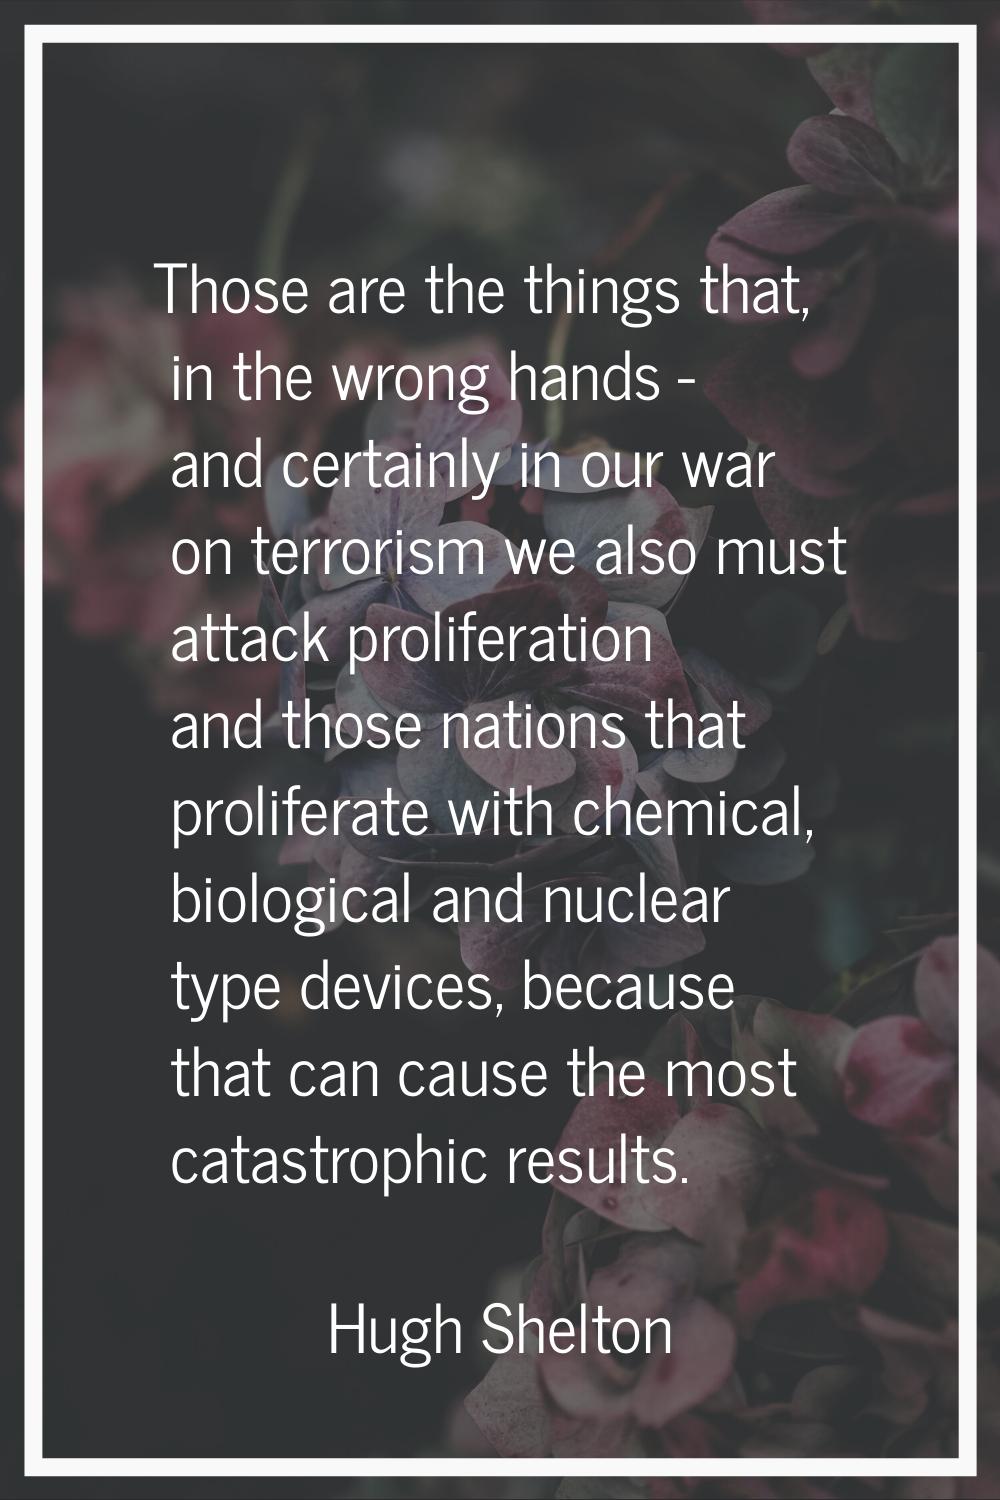 Those are the things that, in the wrong hands - and certainly in our war on terrorism we also must 